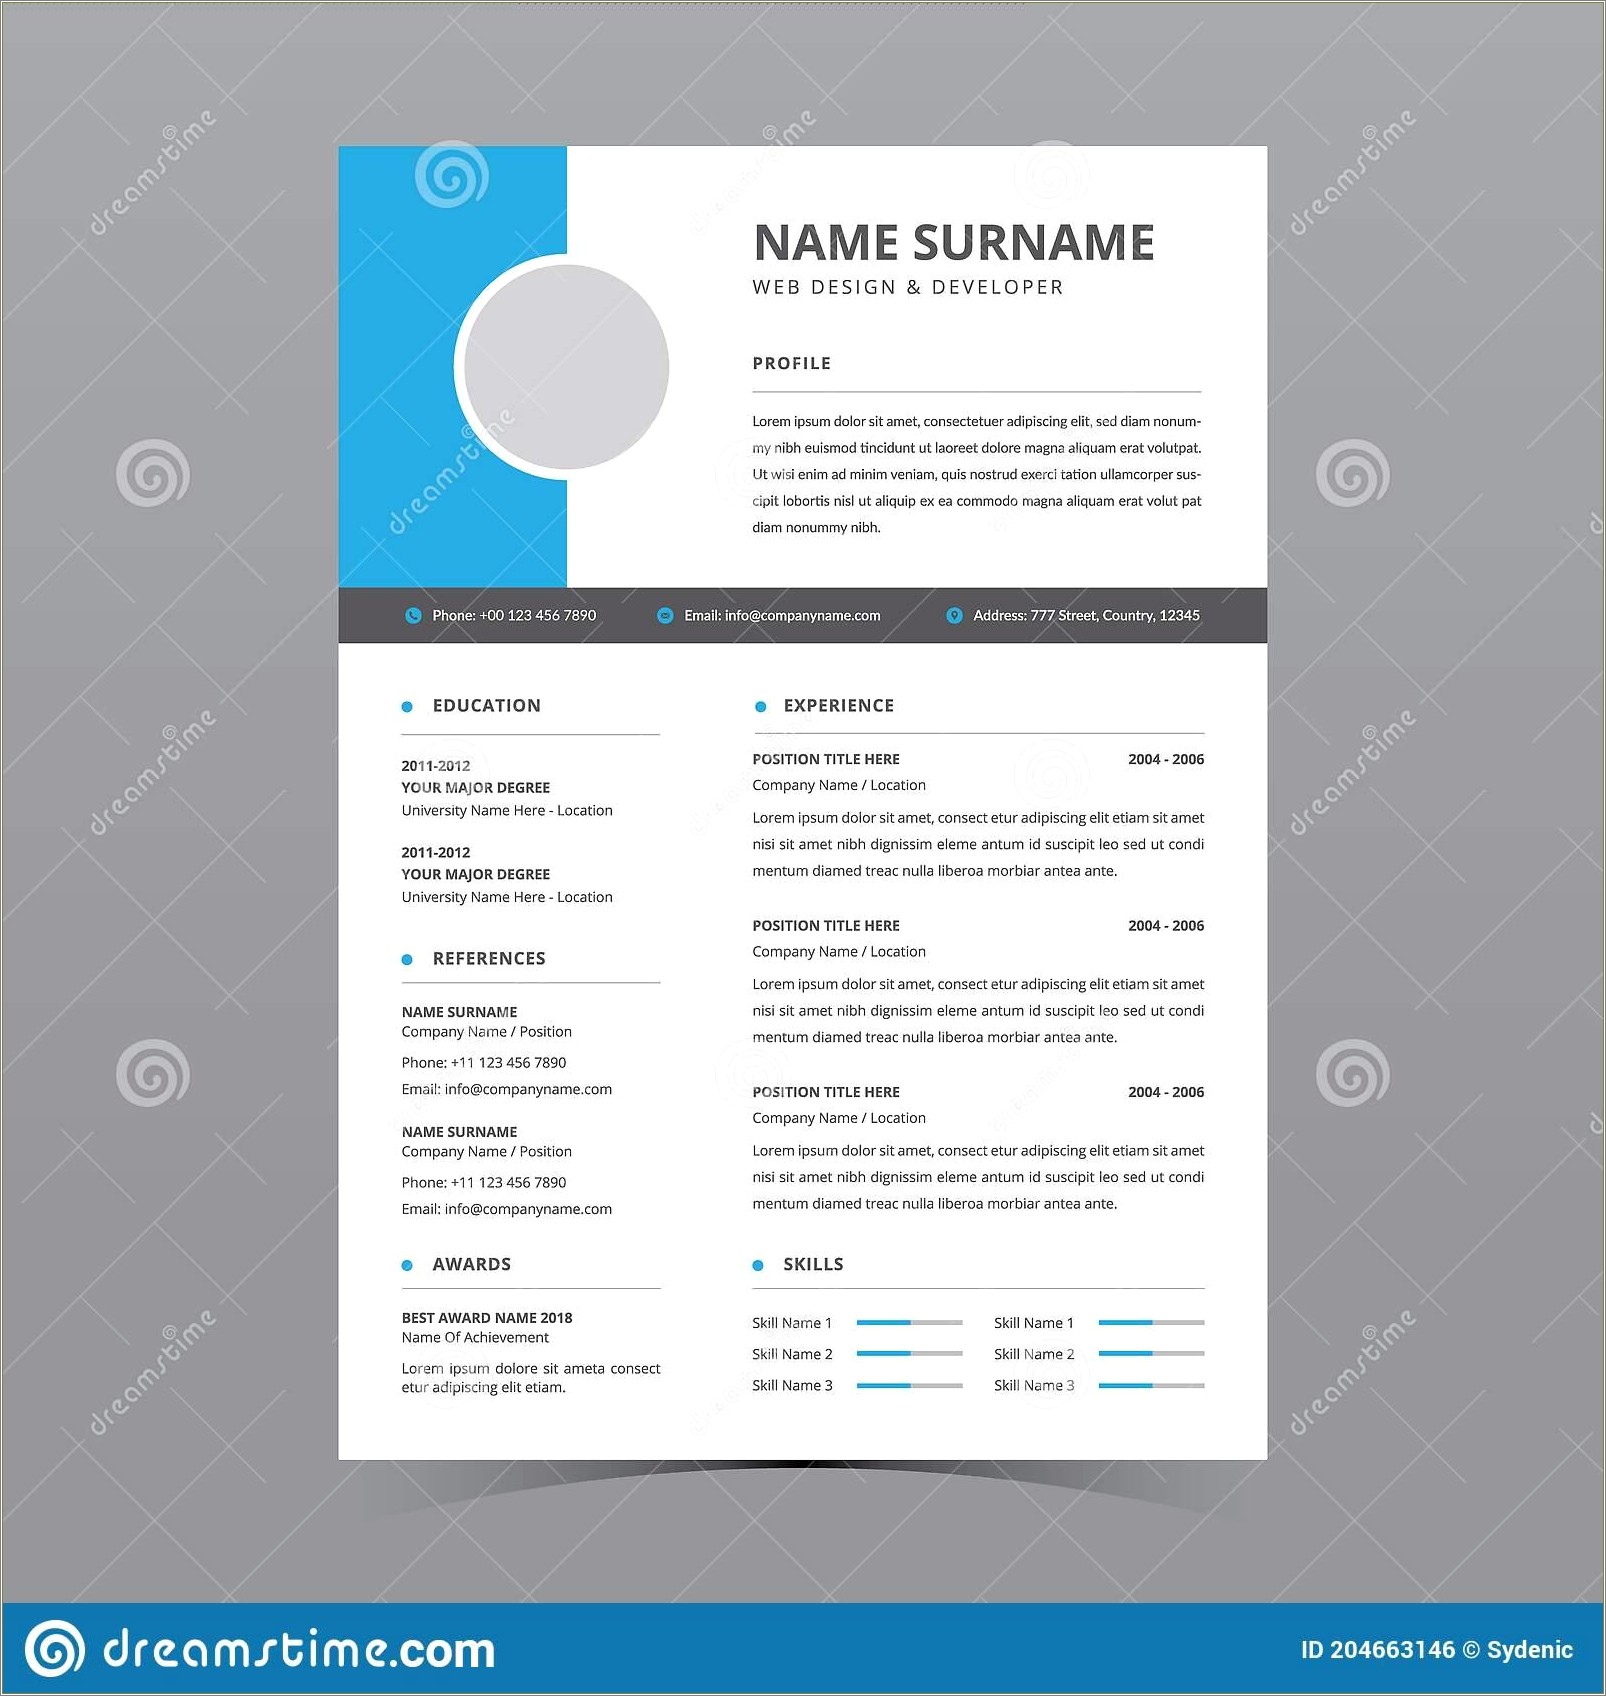 Best Font Size For Resume 2018